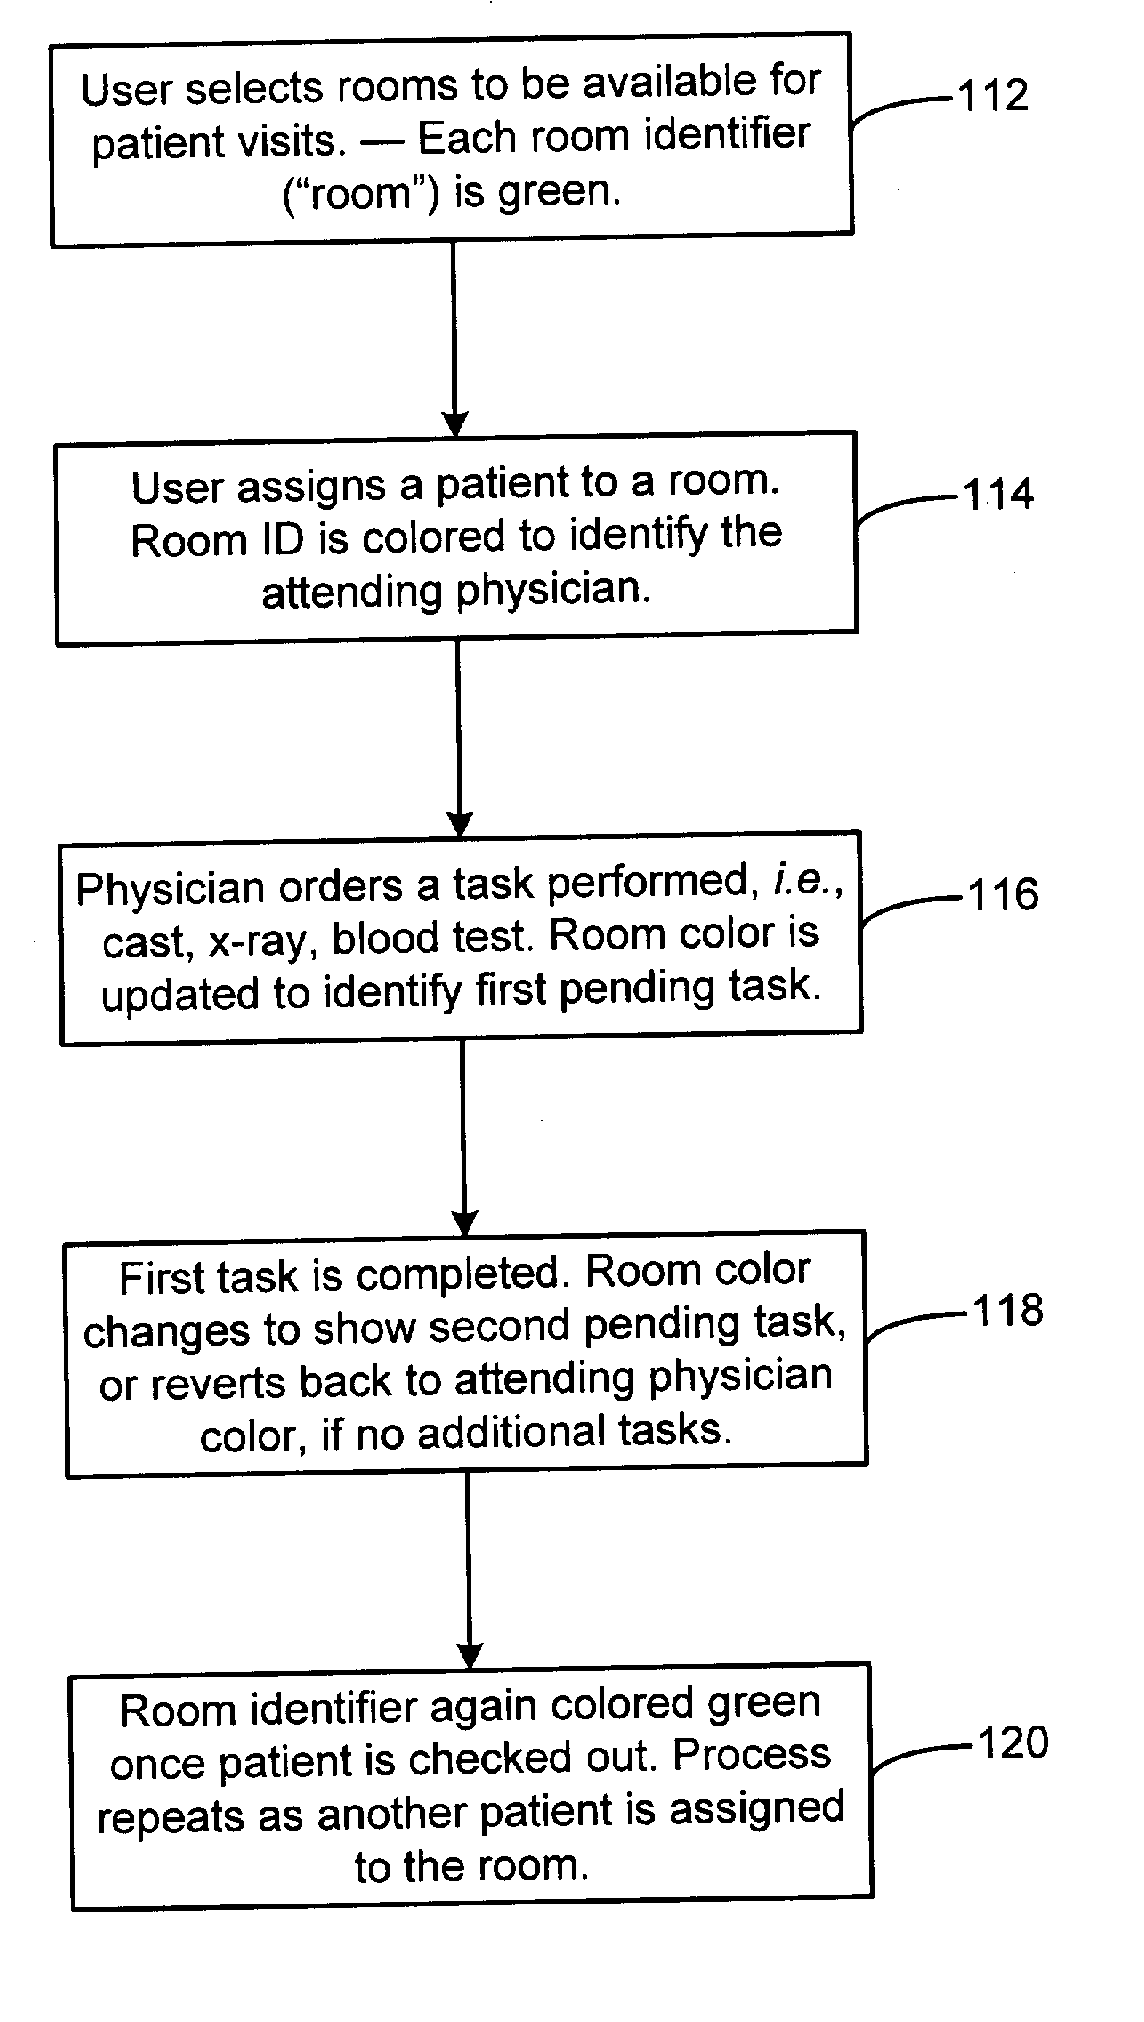 System and method for managing medical facility procedures and records